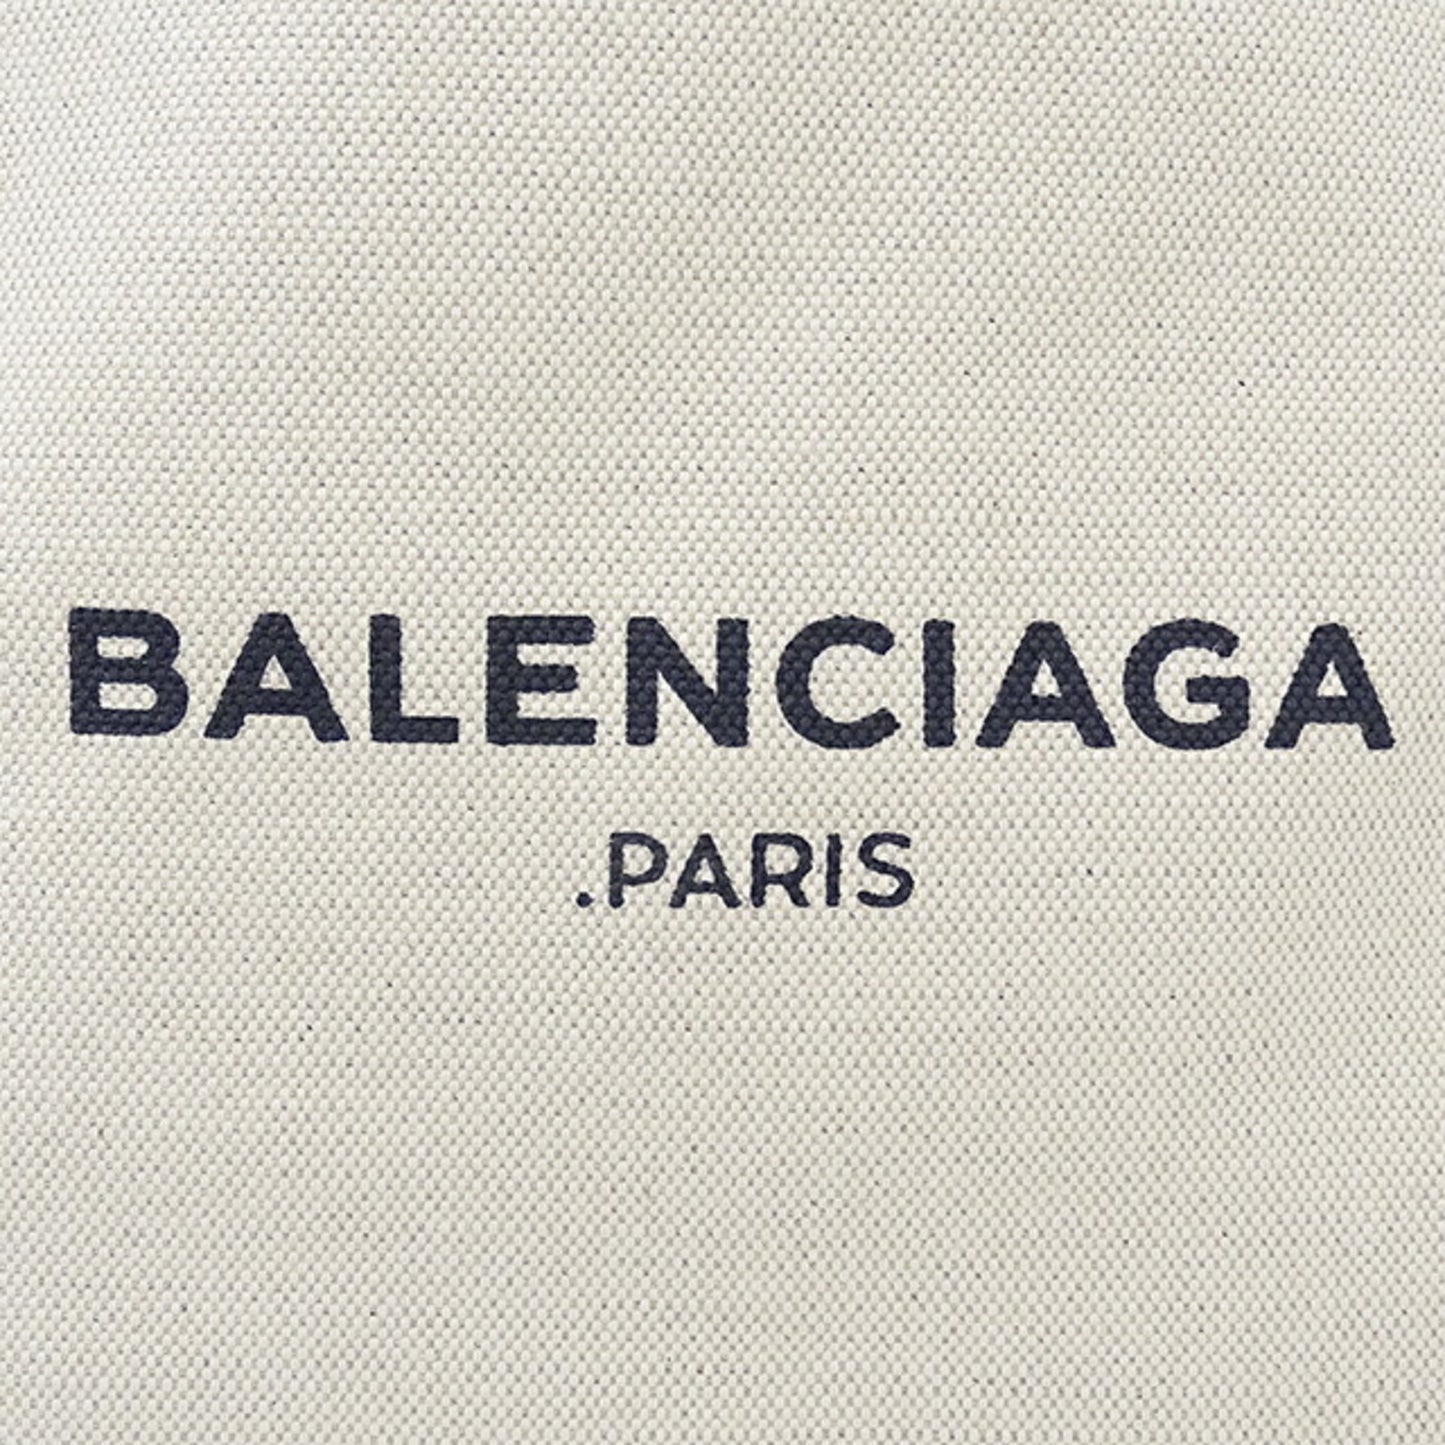 Balenciaga Women's Canvas Tote Bag with Dust Bag and Pouch in Beige